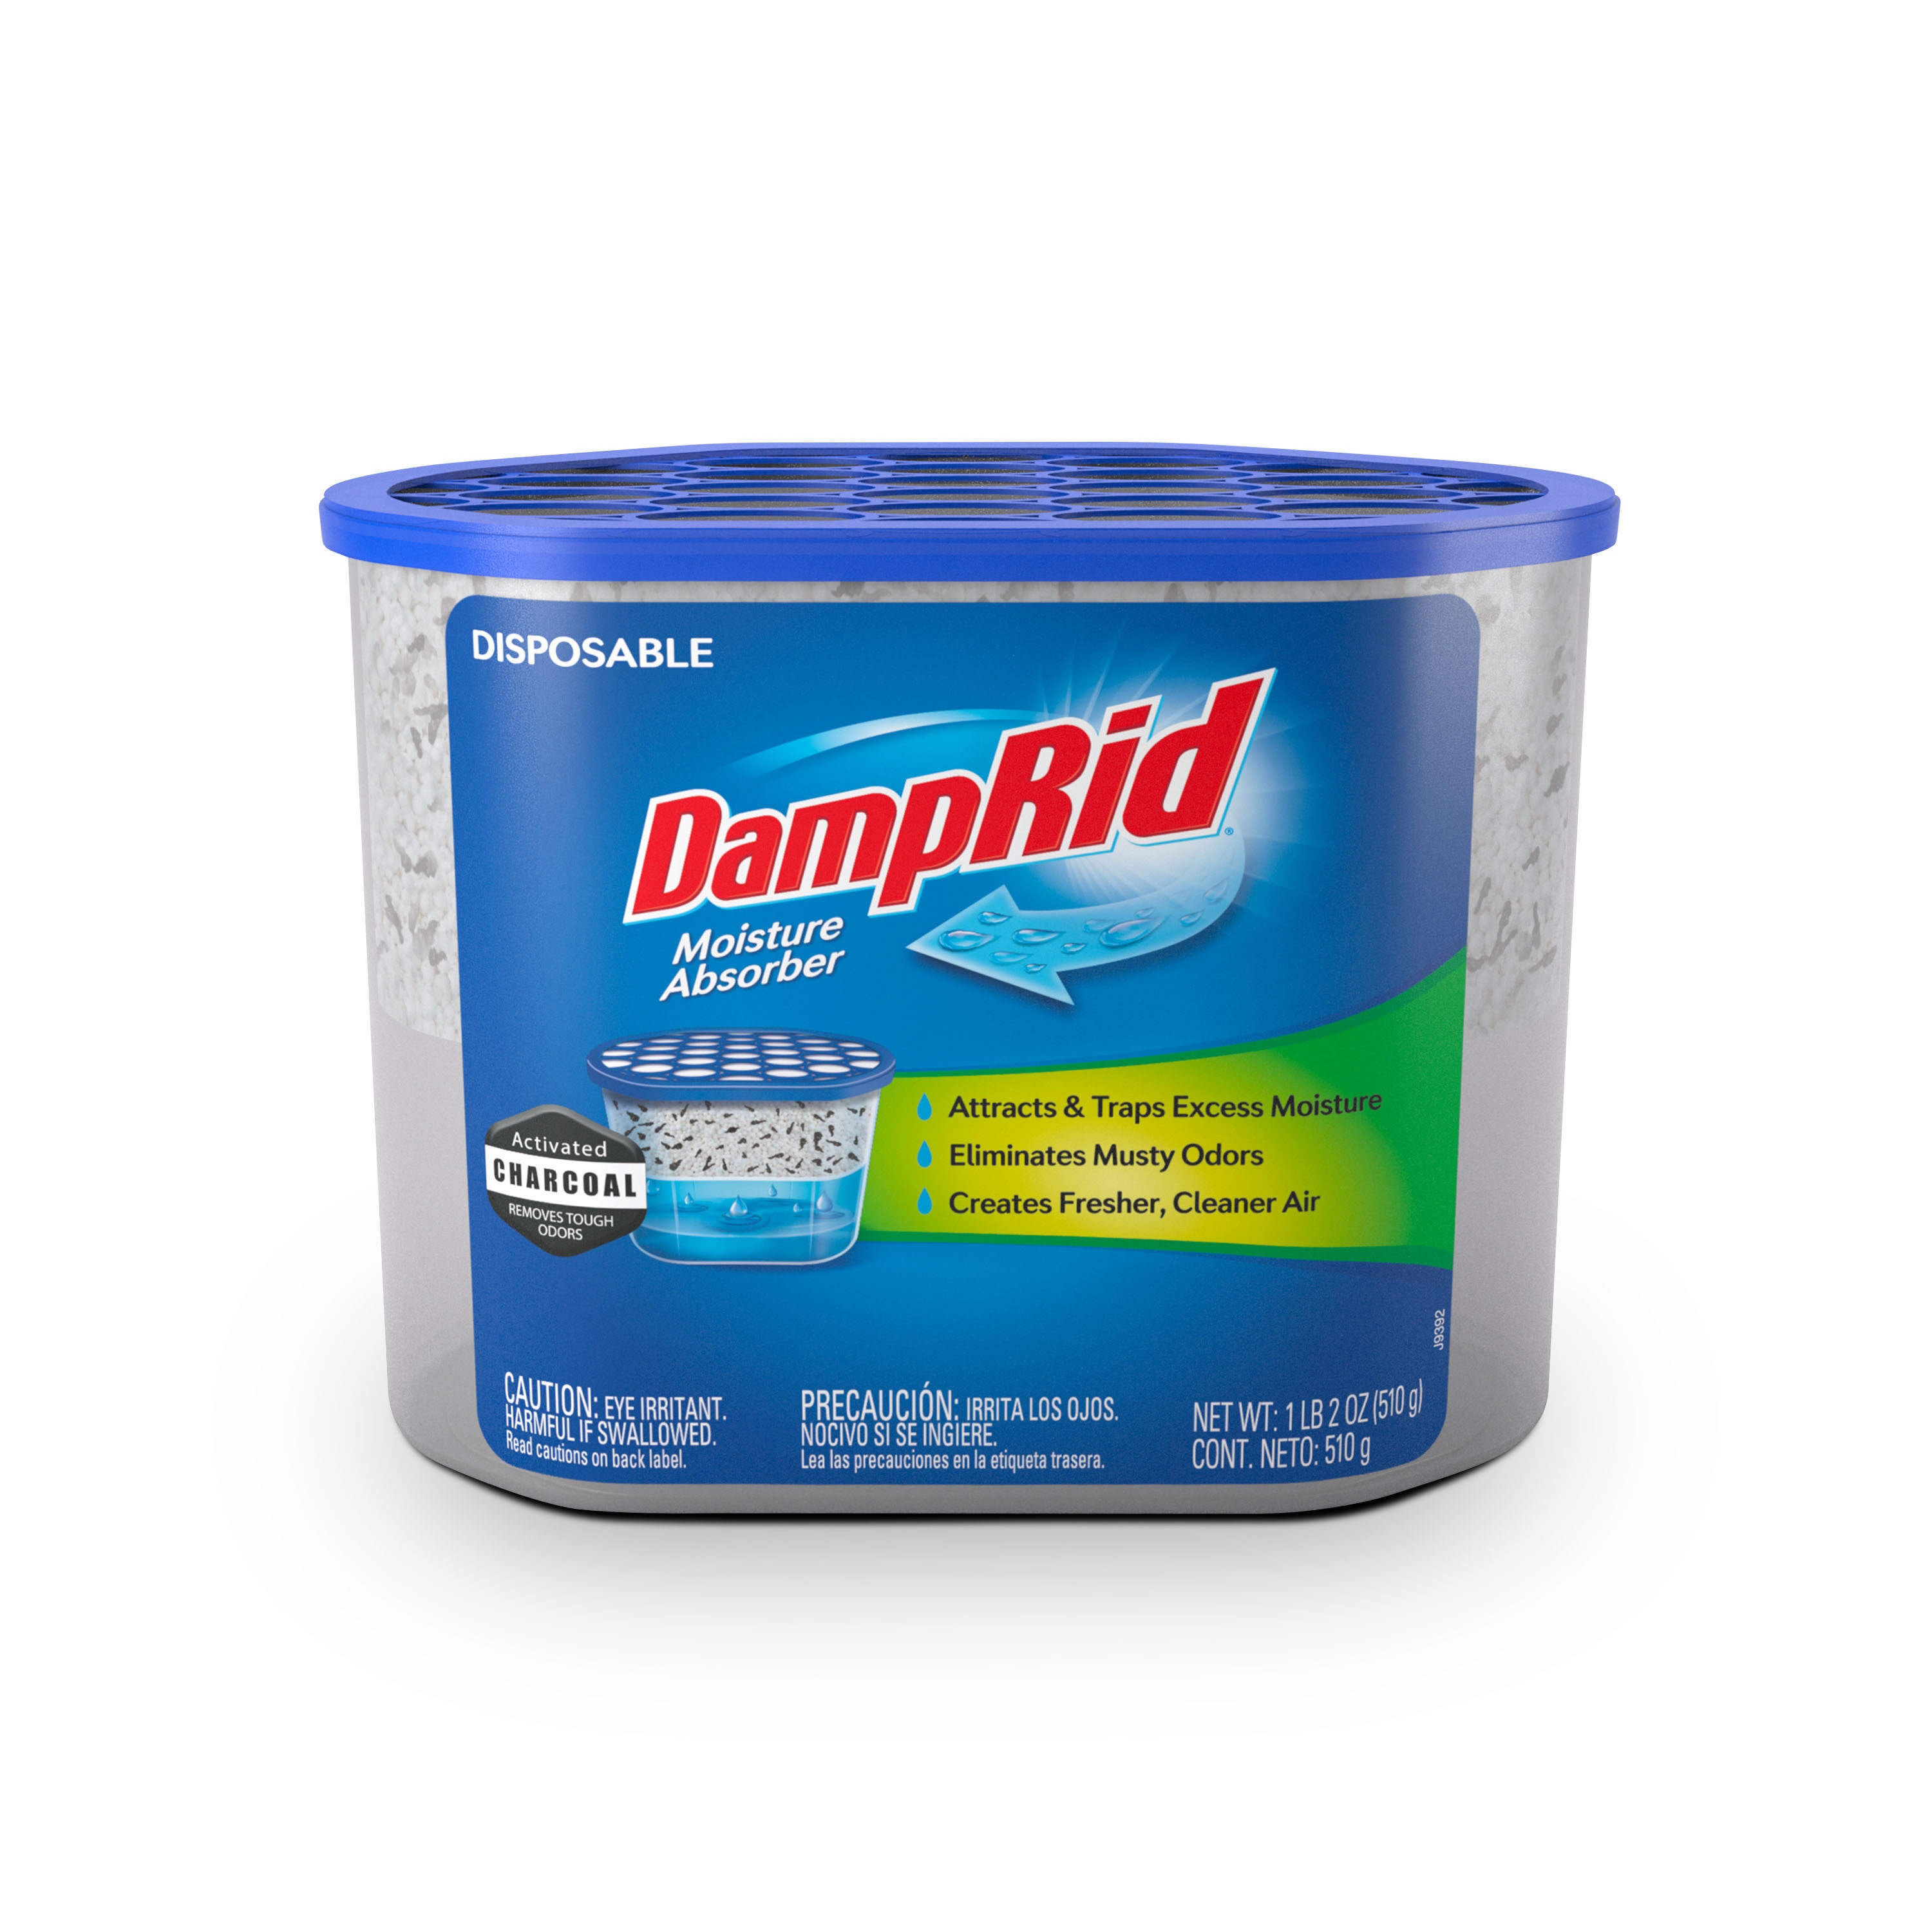 DampRid Refill Bag, 4-Pack - Fresh Scent Moisture Absorbers for Rooms with  Excess Humidity, Long-Lasting, Eliminates Musty Odors and Creates Fresher